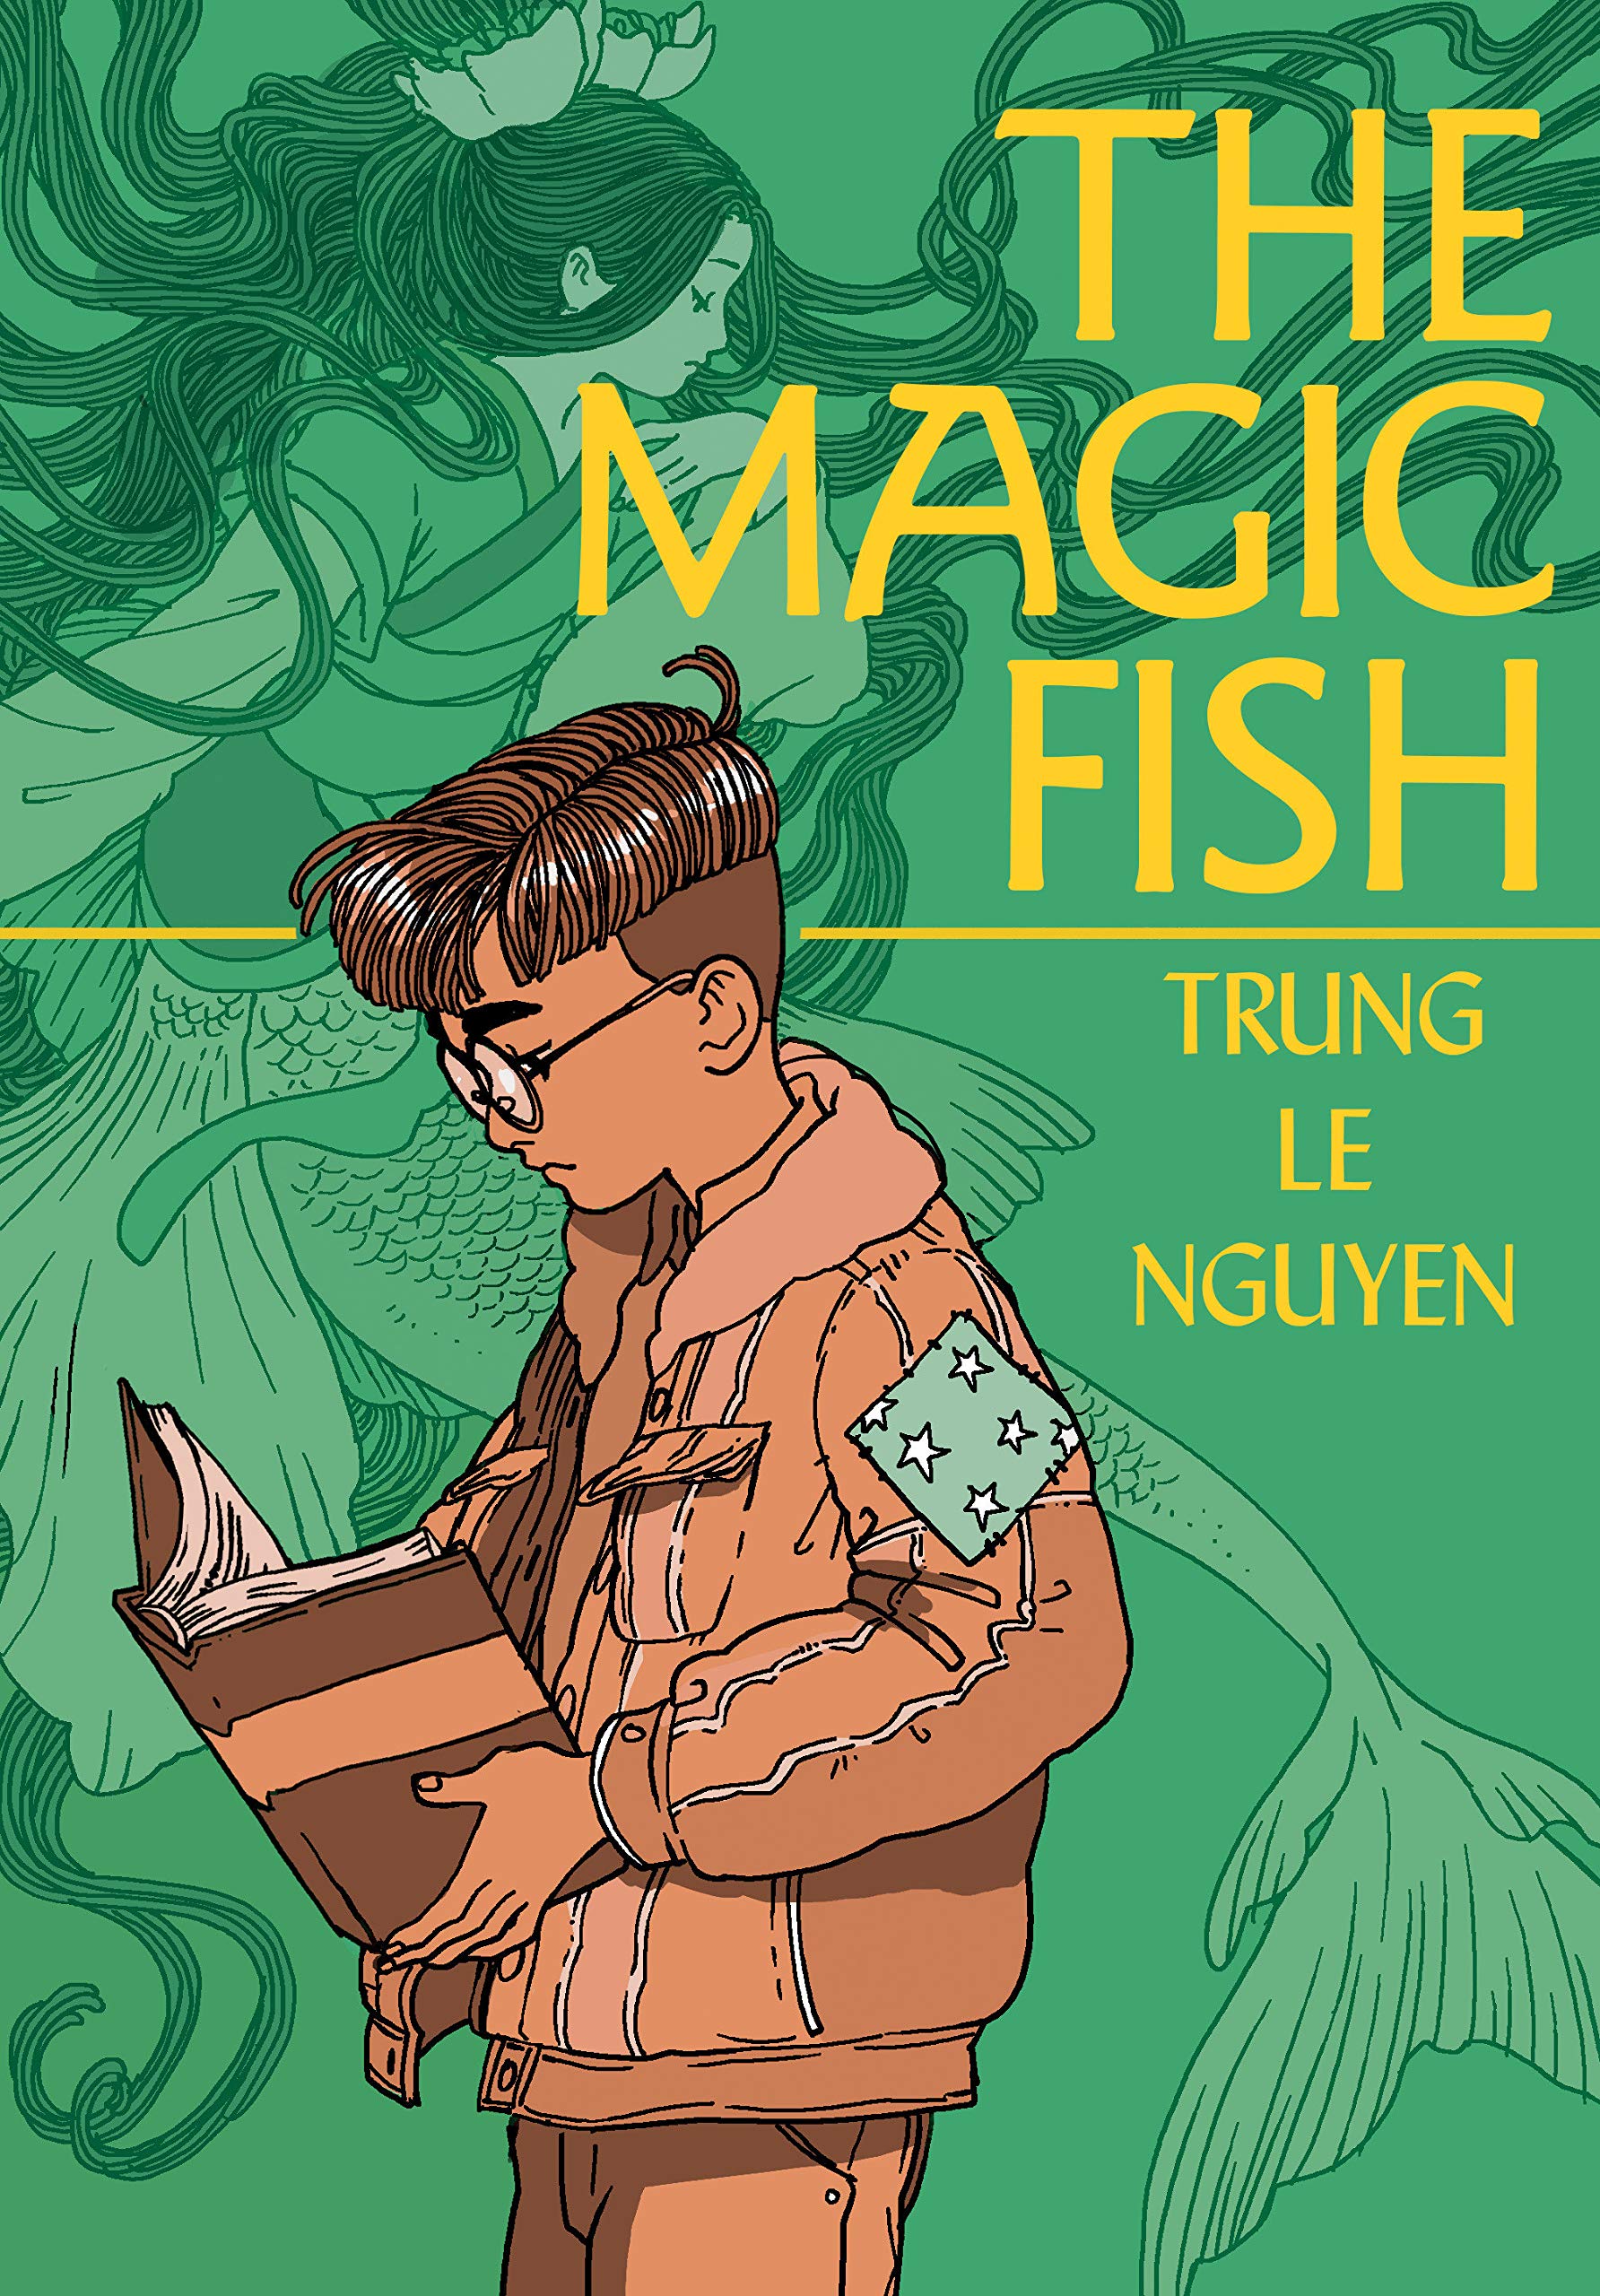 Light-green background with an image of a mermaid with long, dark hair. An Asian tween boy with glasses and a jacket stands facing the spine of the book, while holding a book. The title of the book and the author's name are written in yellow text in the upper-righthand corner.